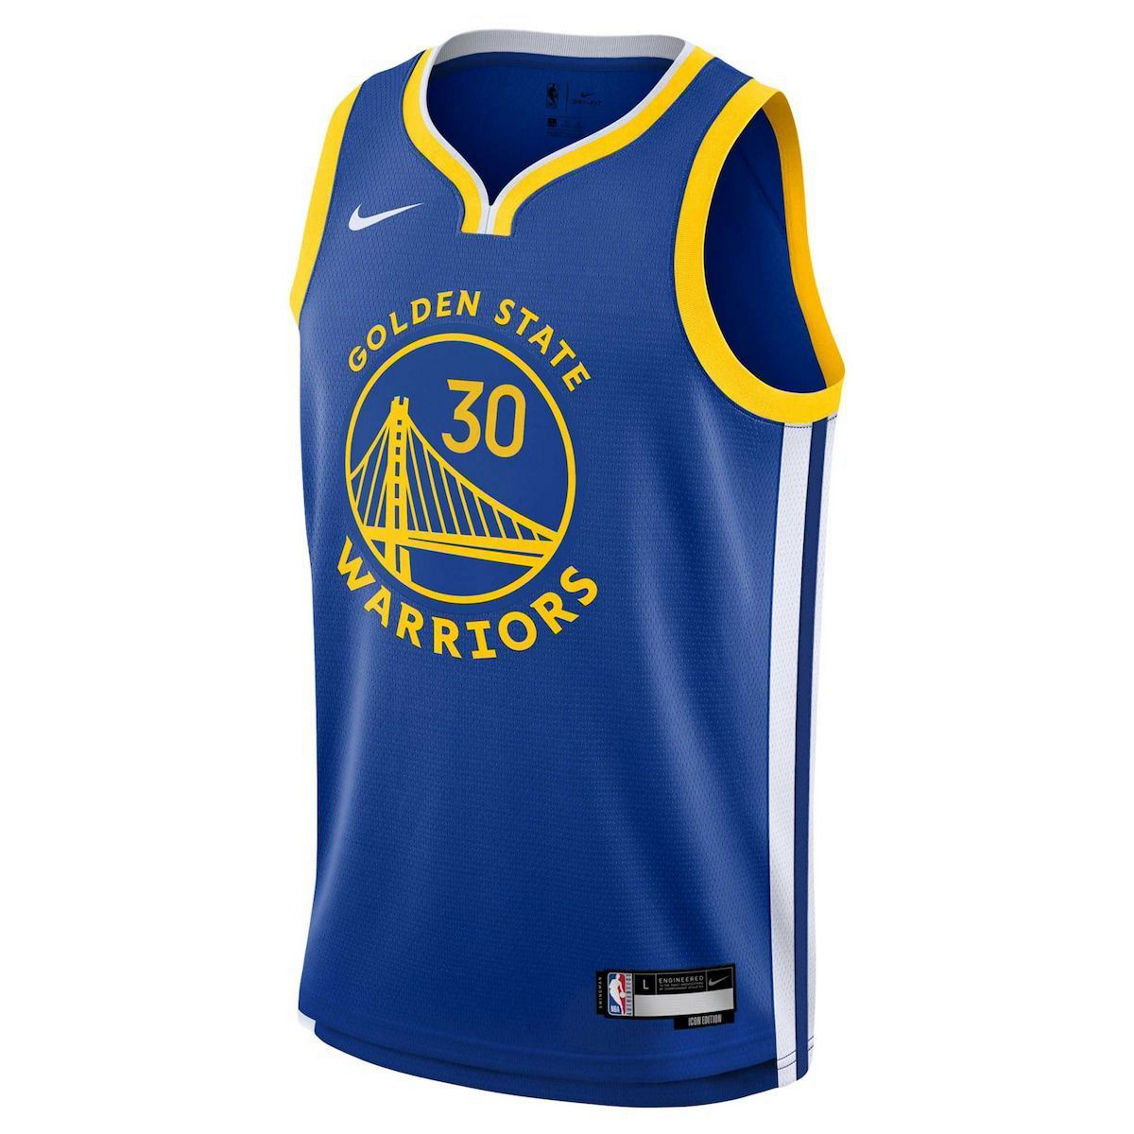 Nike Youth Stephen Curry Royal Golden State Warriors Swingman Jersey - Icon Edition - Image 3 of 4